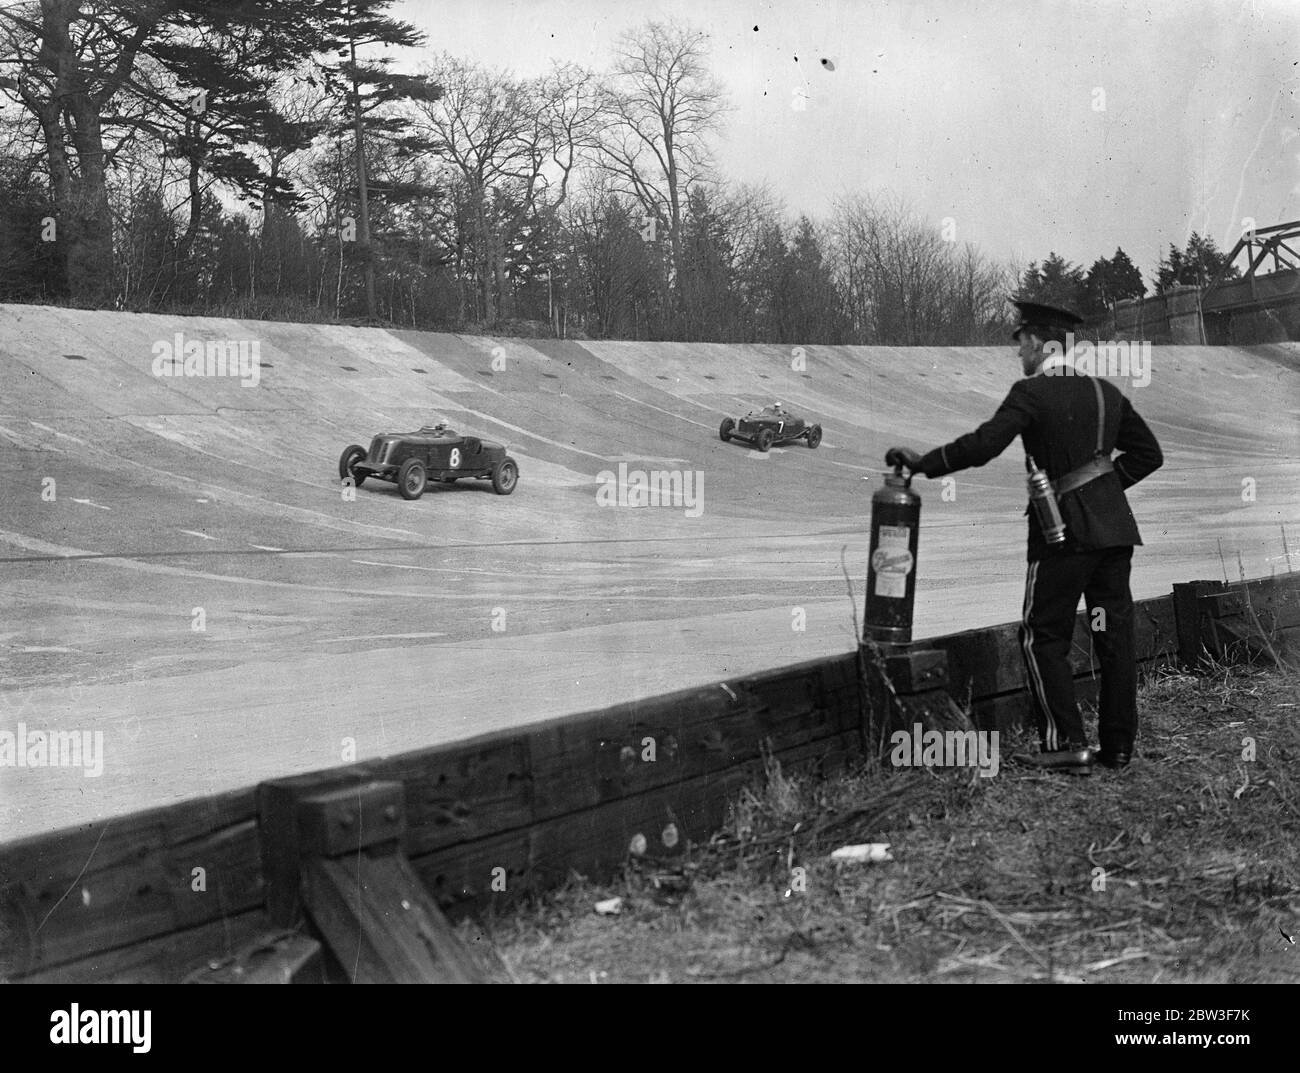 Women beats men at first Brooklands meeting . With women racing on equal terms with men for the first time , the first meeting of the new motor racing season was held at Brooklands . An early victory was scored for the women by Miss D Summers , who gained first place in the Second March Short Handicap driving a Mercedez Special . Photo shows , racing over the railway straight . A fireman is in foreground . 14 March 1936 Stock Photo